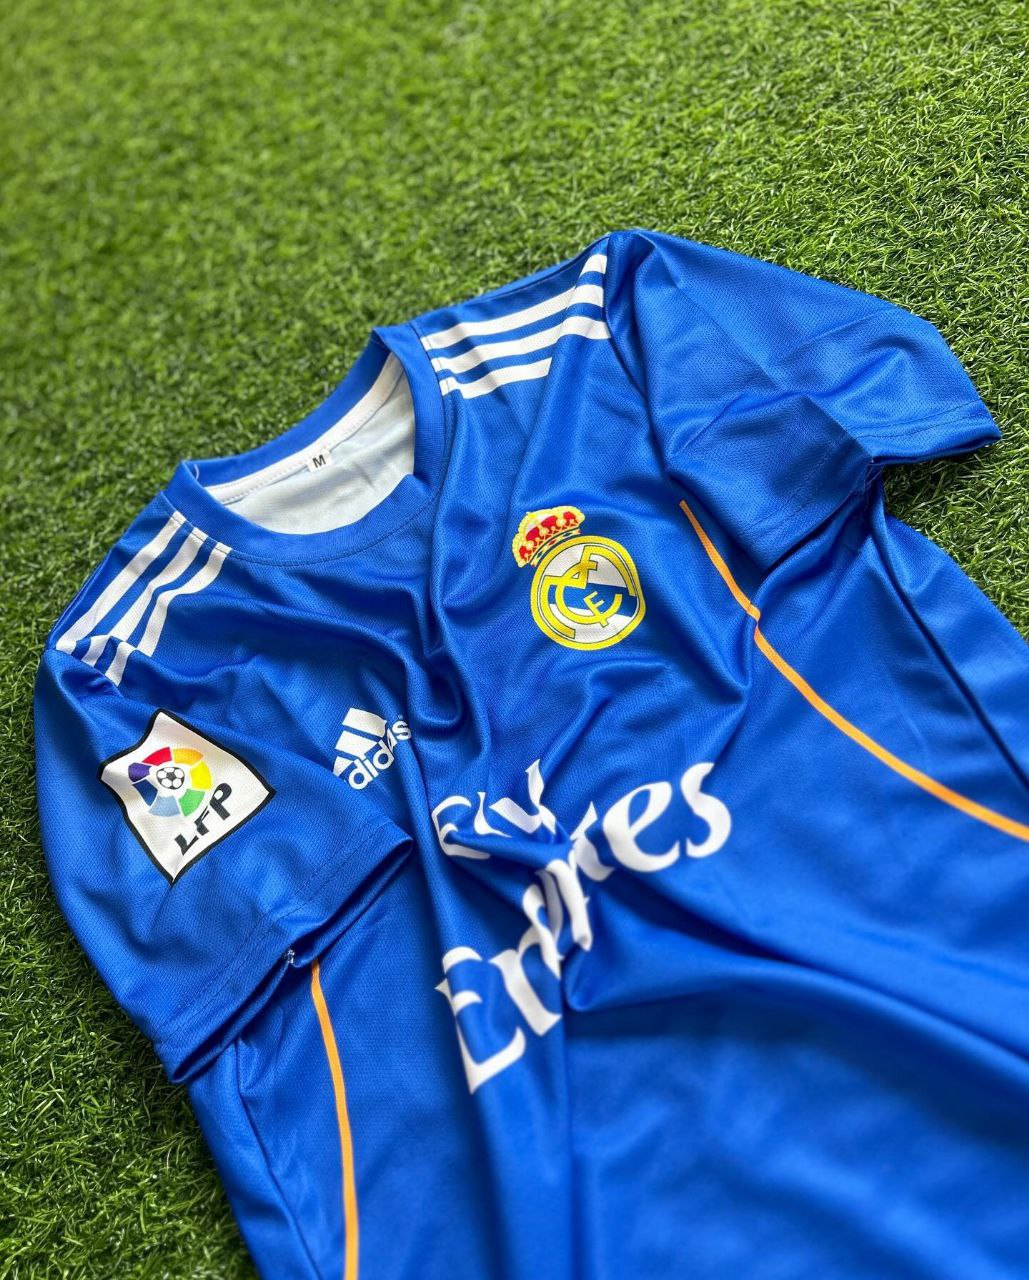 Marcelo 2013-14 Real Madrid Blue Retro Jersey